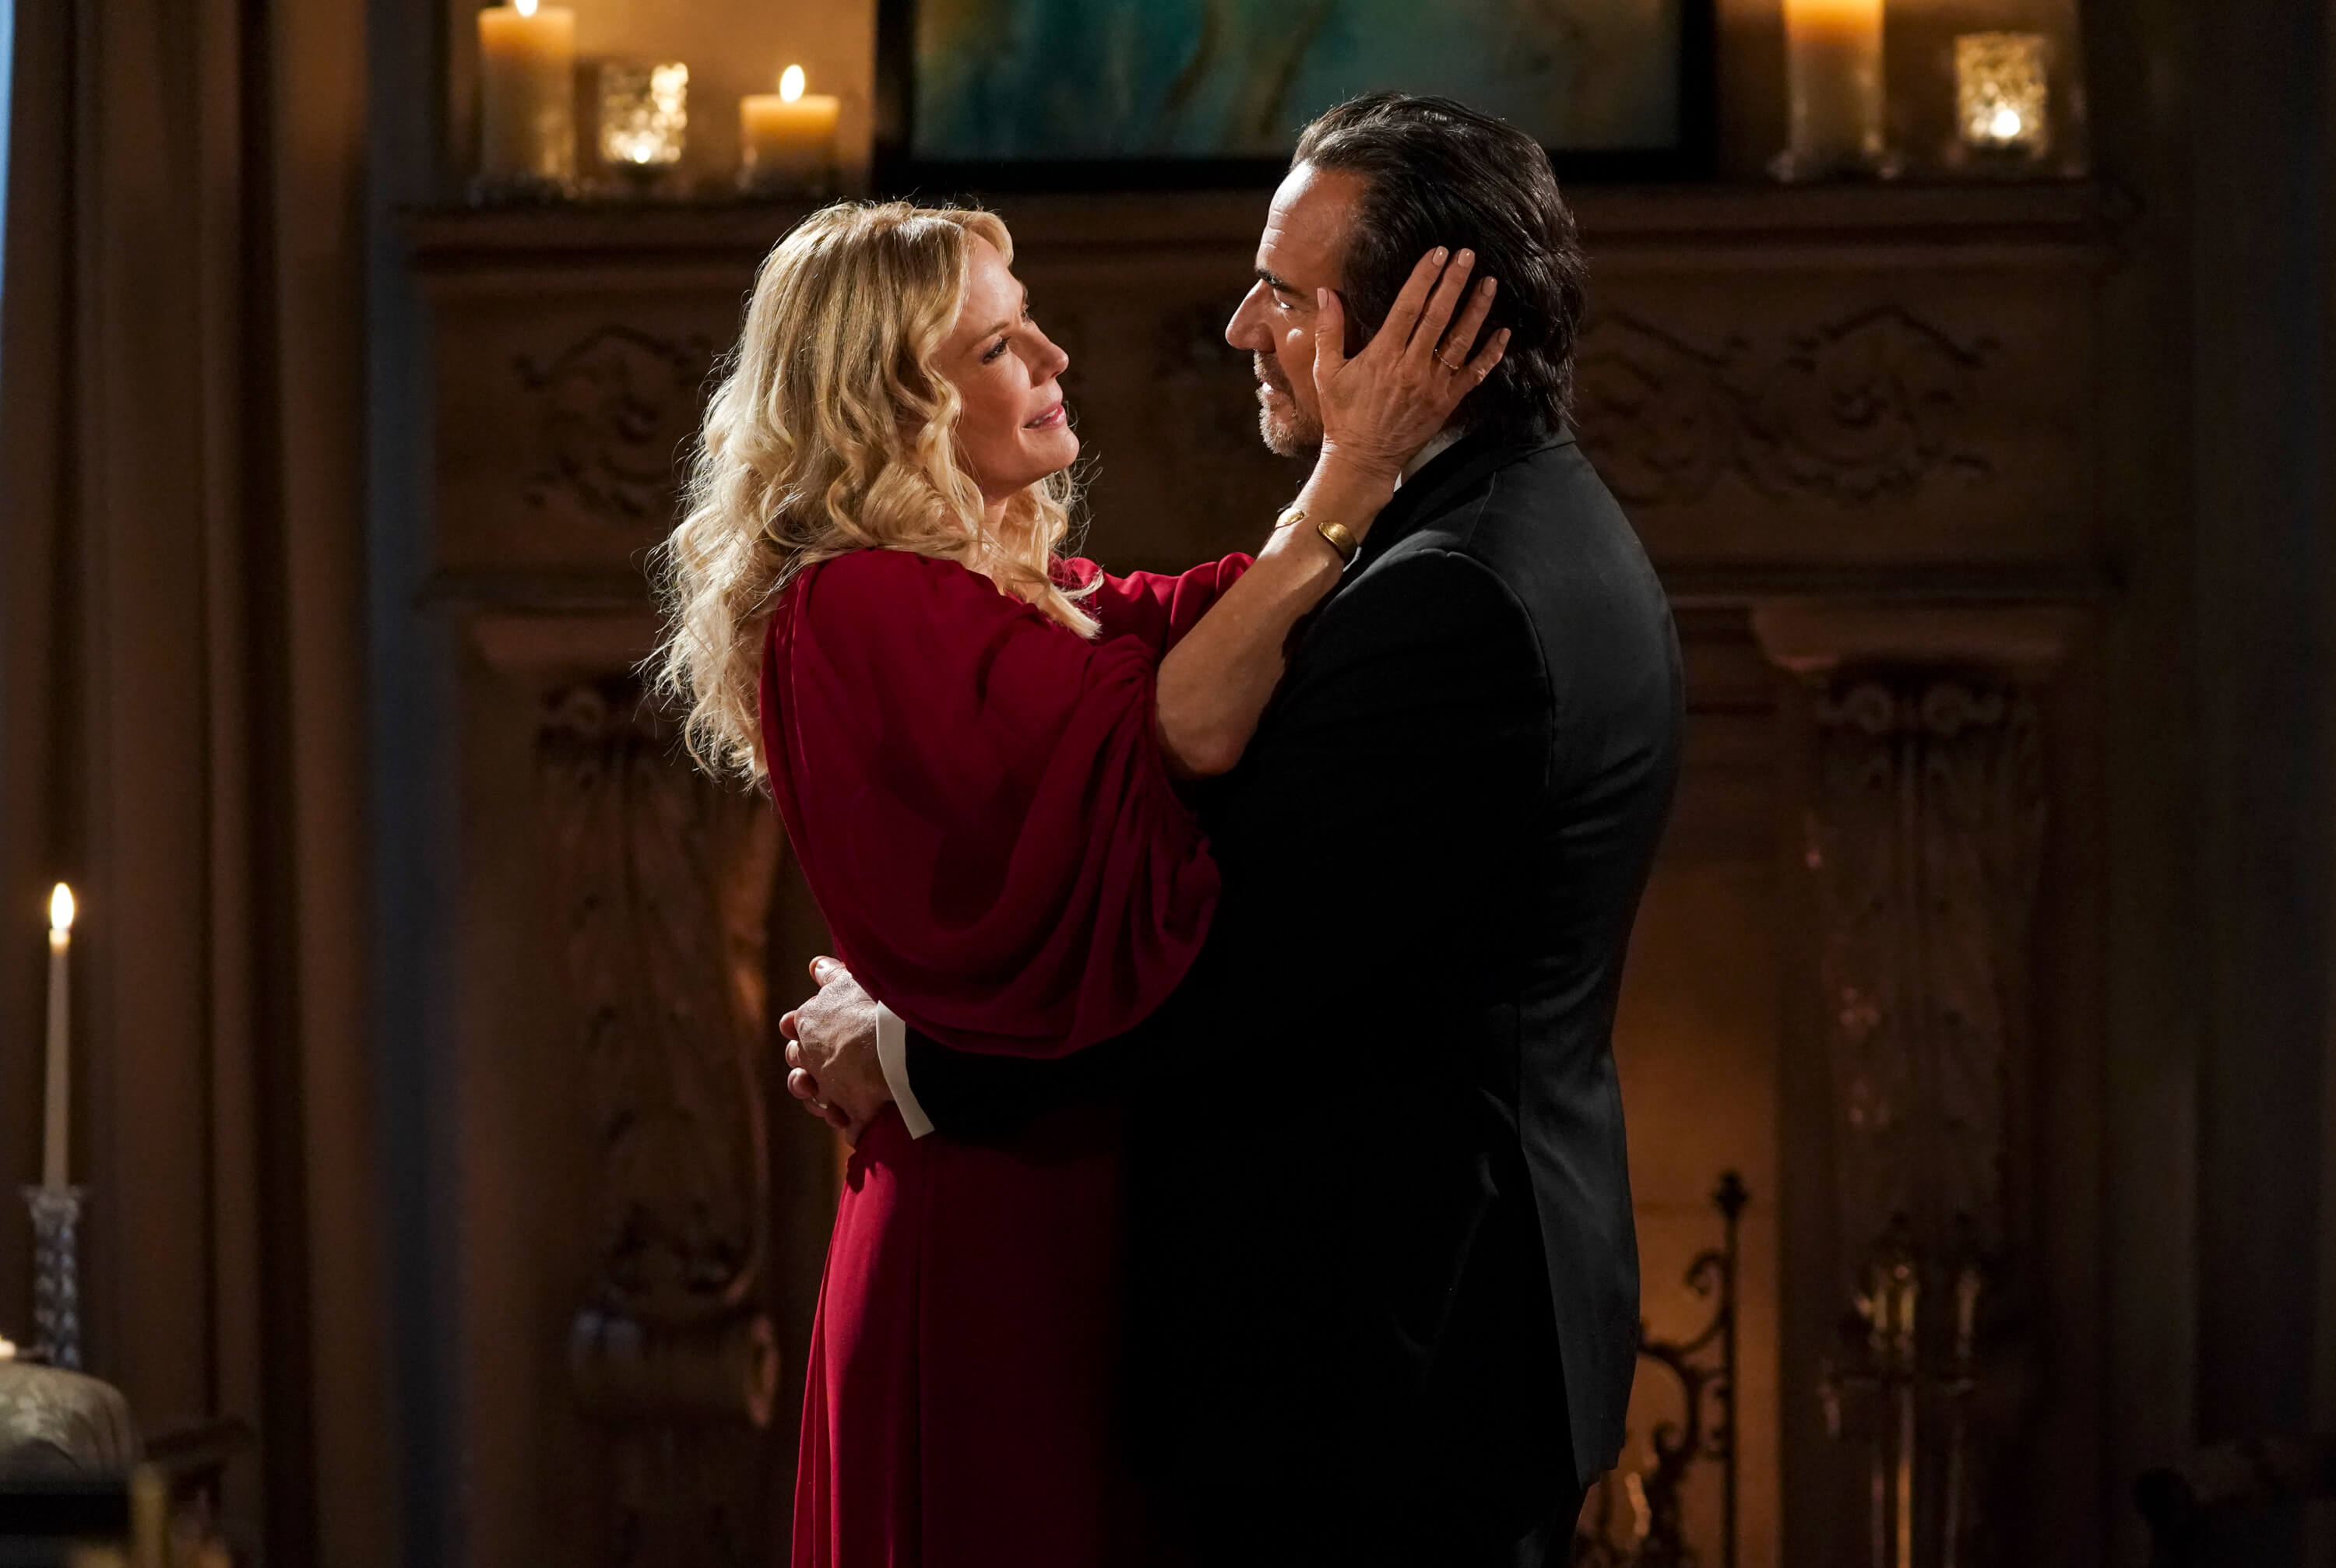 'The Bold and the Beautiful' star Katherine Kelly Lang in a red dress and Thorsten Kaye in a tuxedo; in a scene from the soap opera.